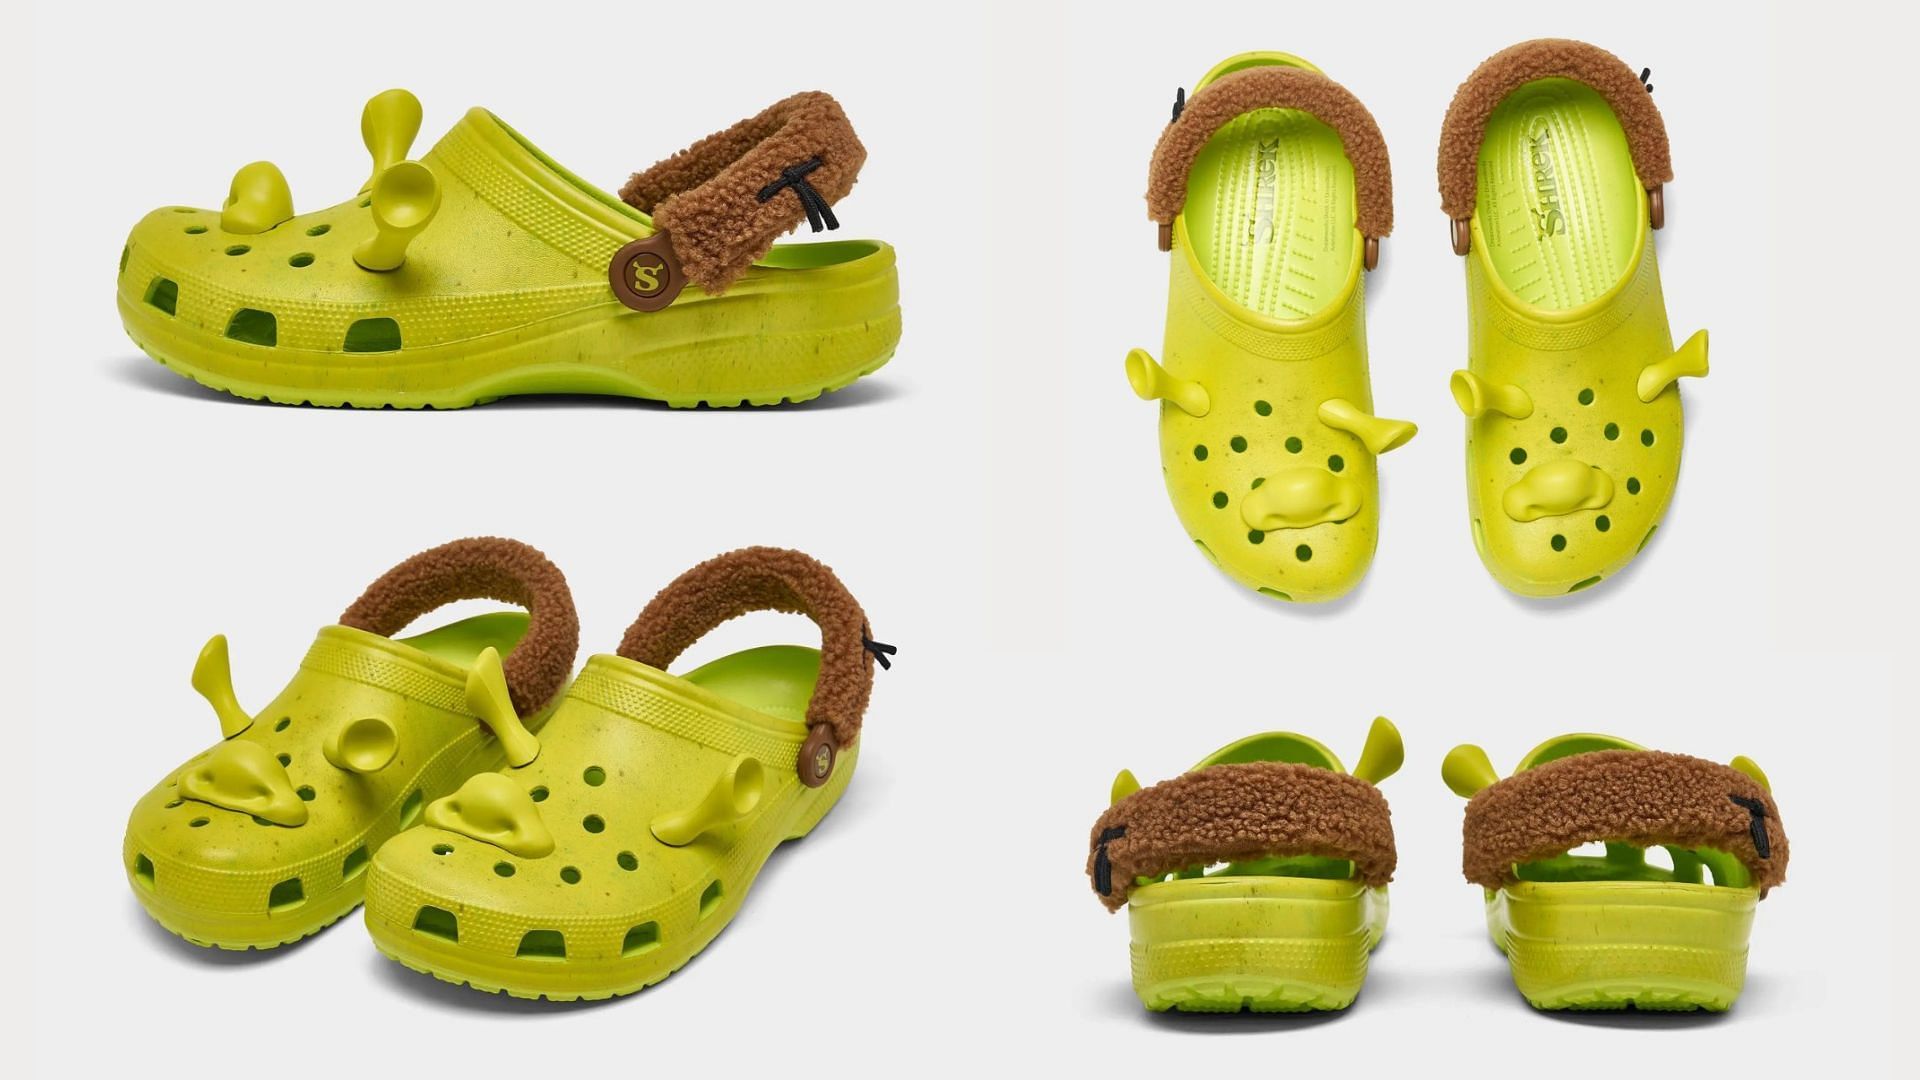 Here's an official look at the #shrek x #crocs classic clog, coming soon!